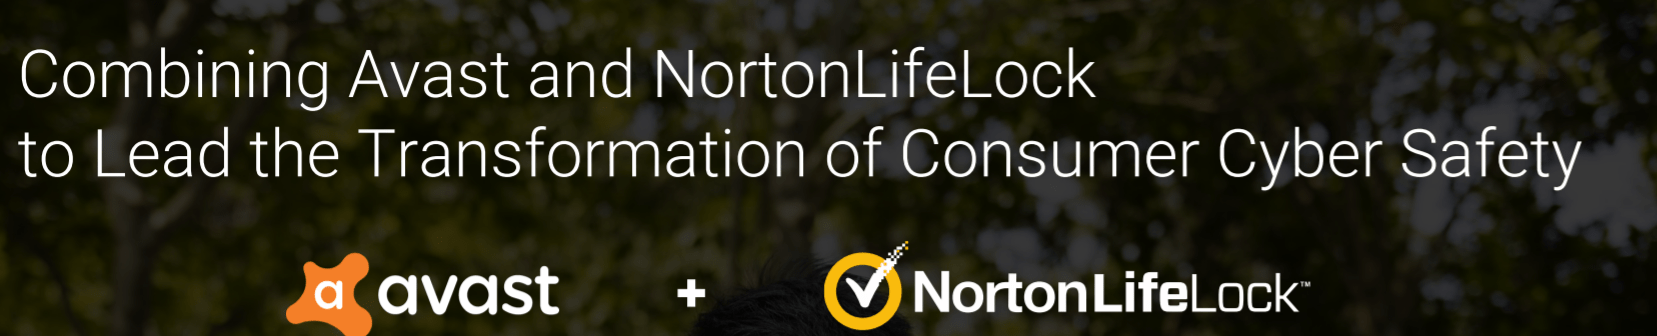 NortonLifeLock and Avast Merger would create a new cyber security behemoth